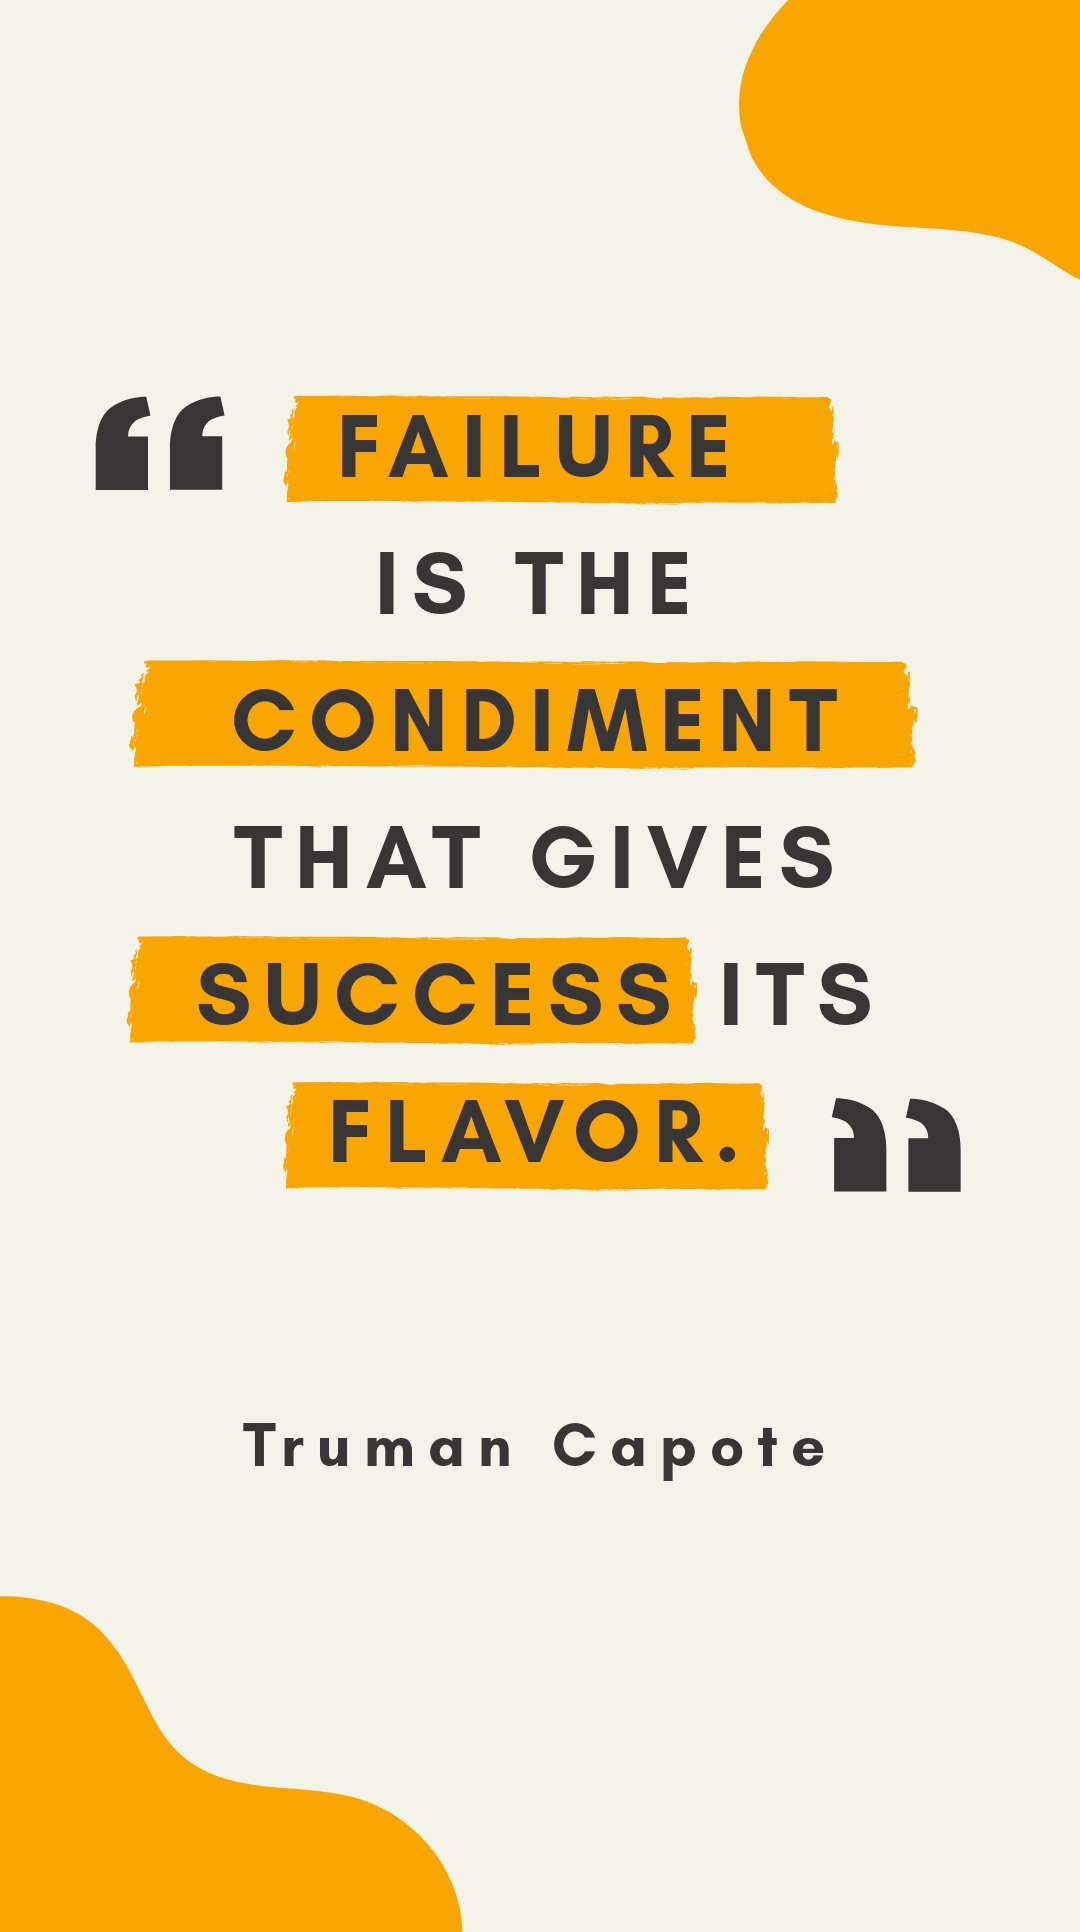 Truman Capote - Failure is the condiment that gives success its flavor.